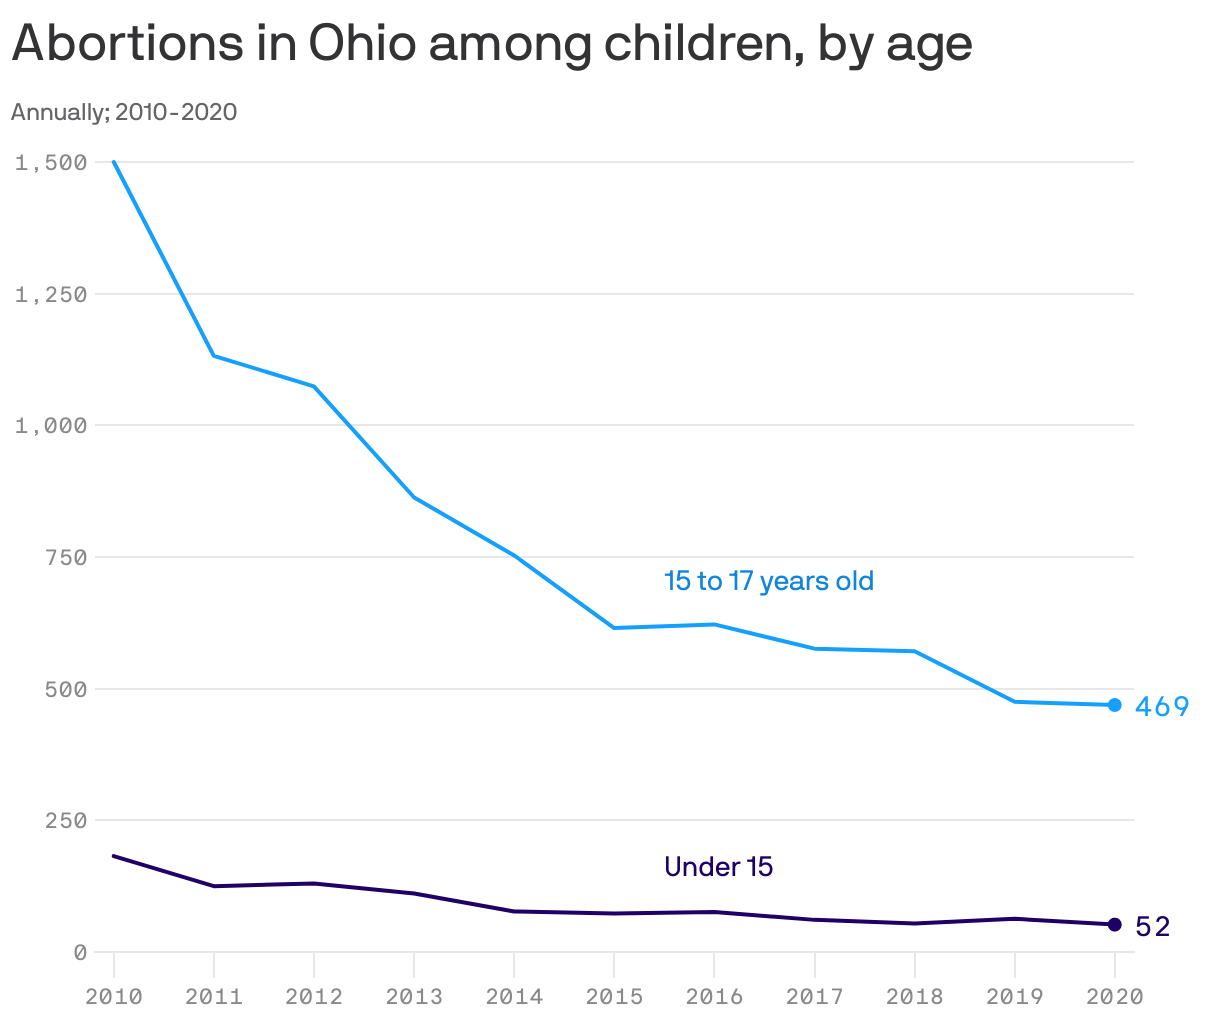 Abortions in Ohio among children, by age